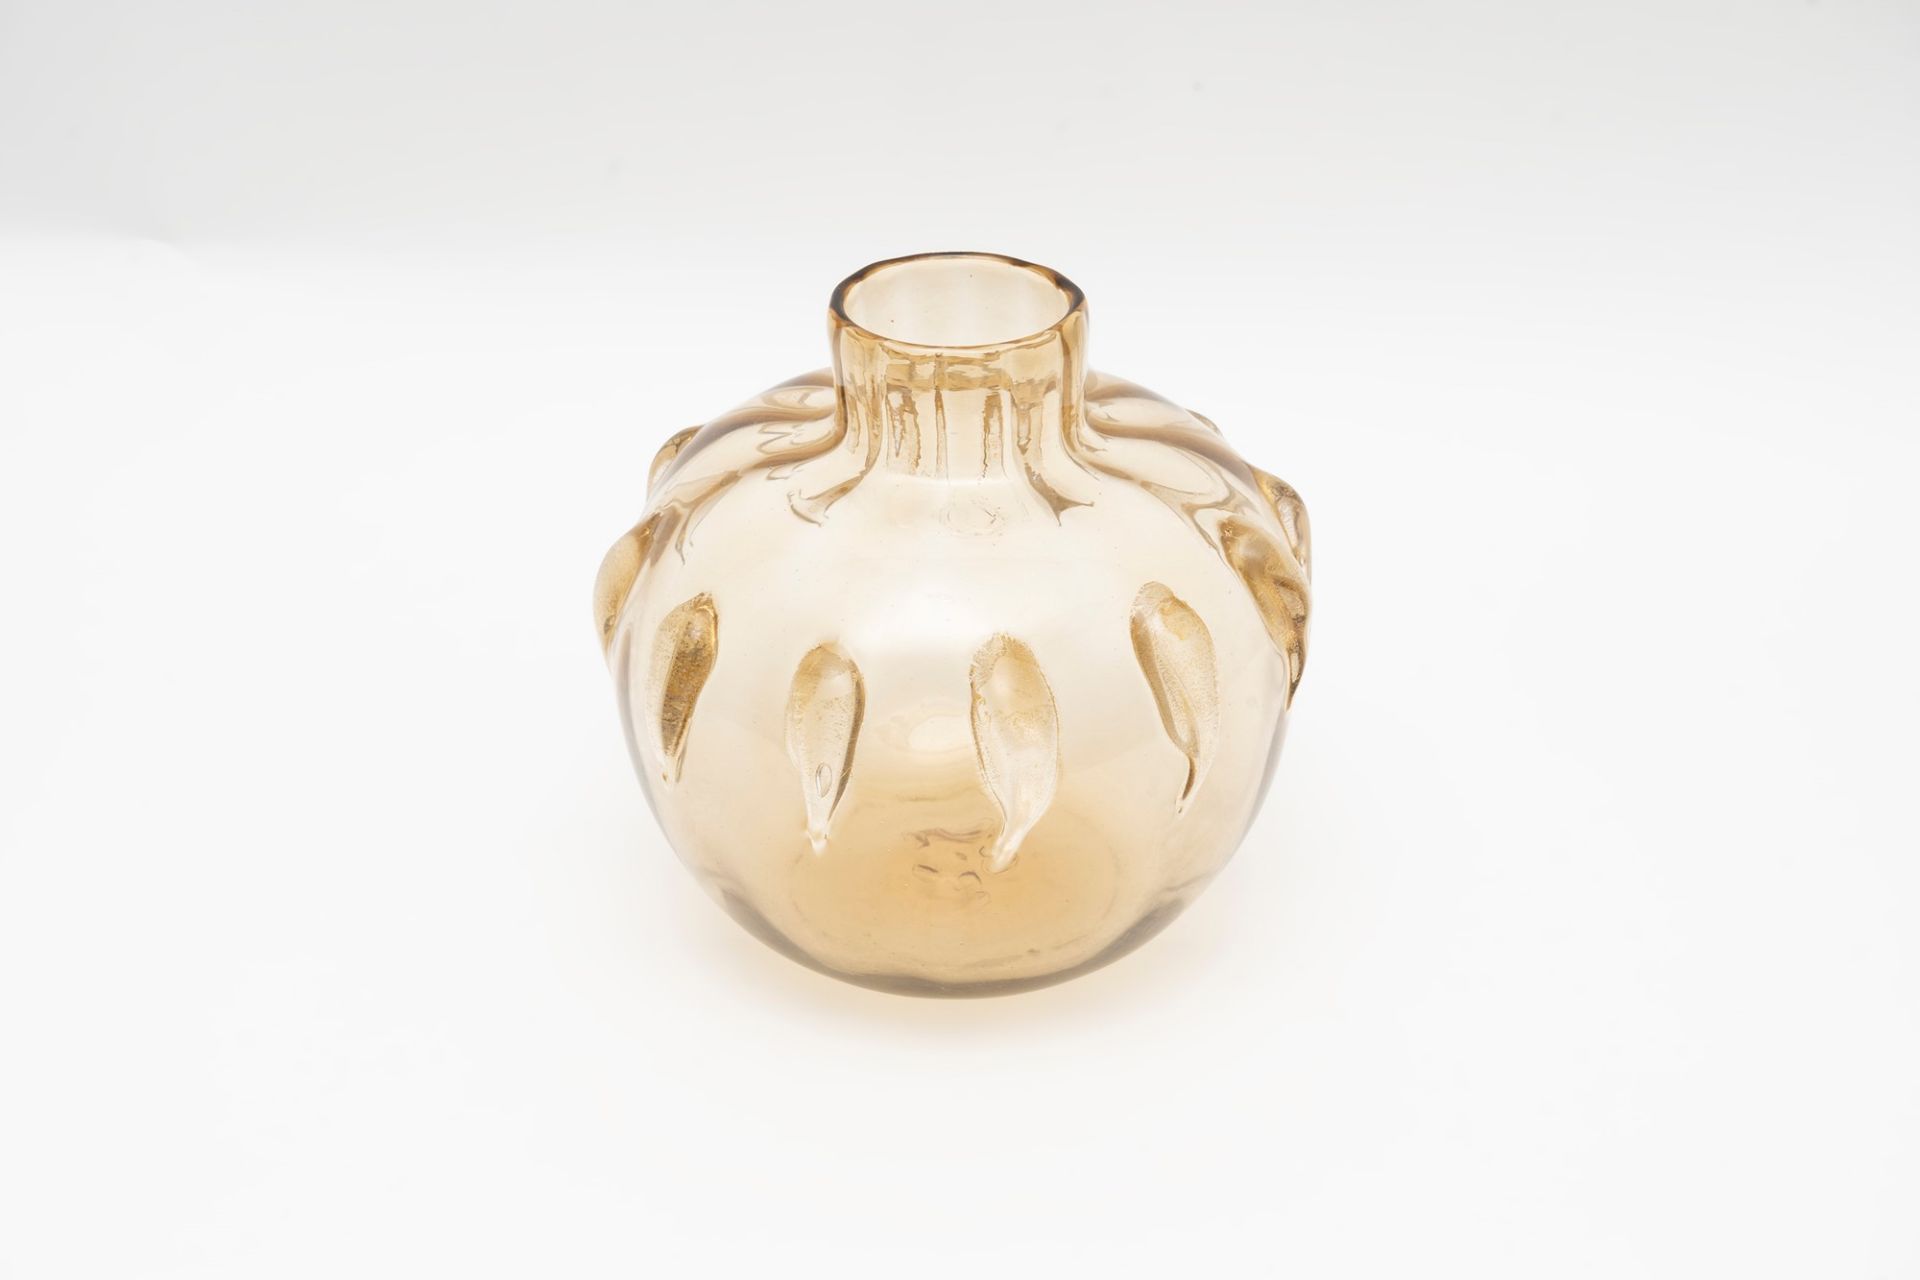 Murano glass vase with gold inclusions, 1940s-50s